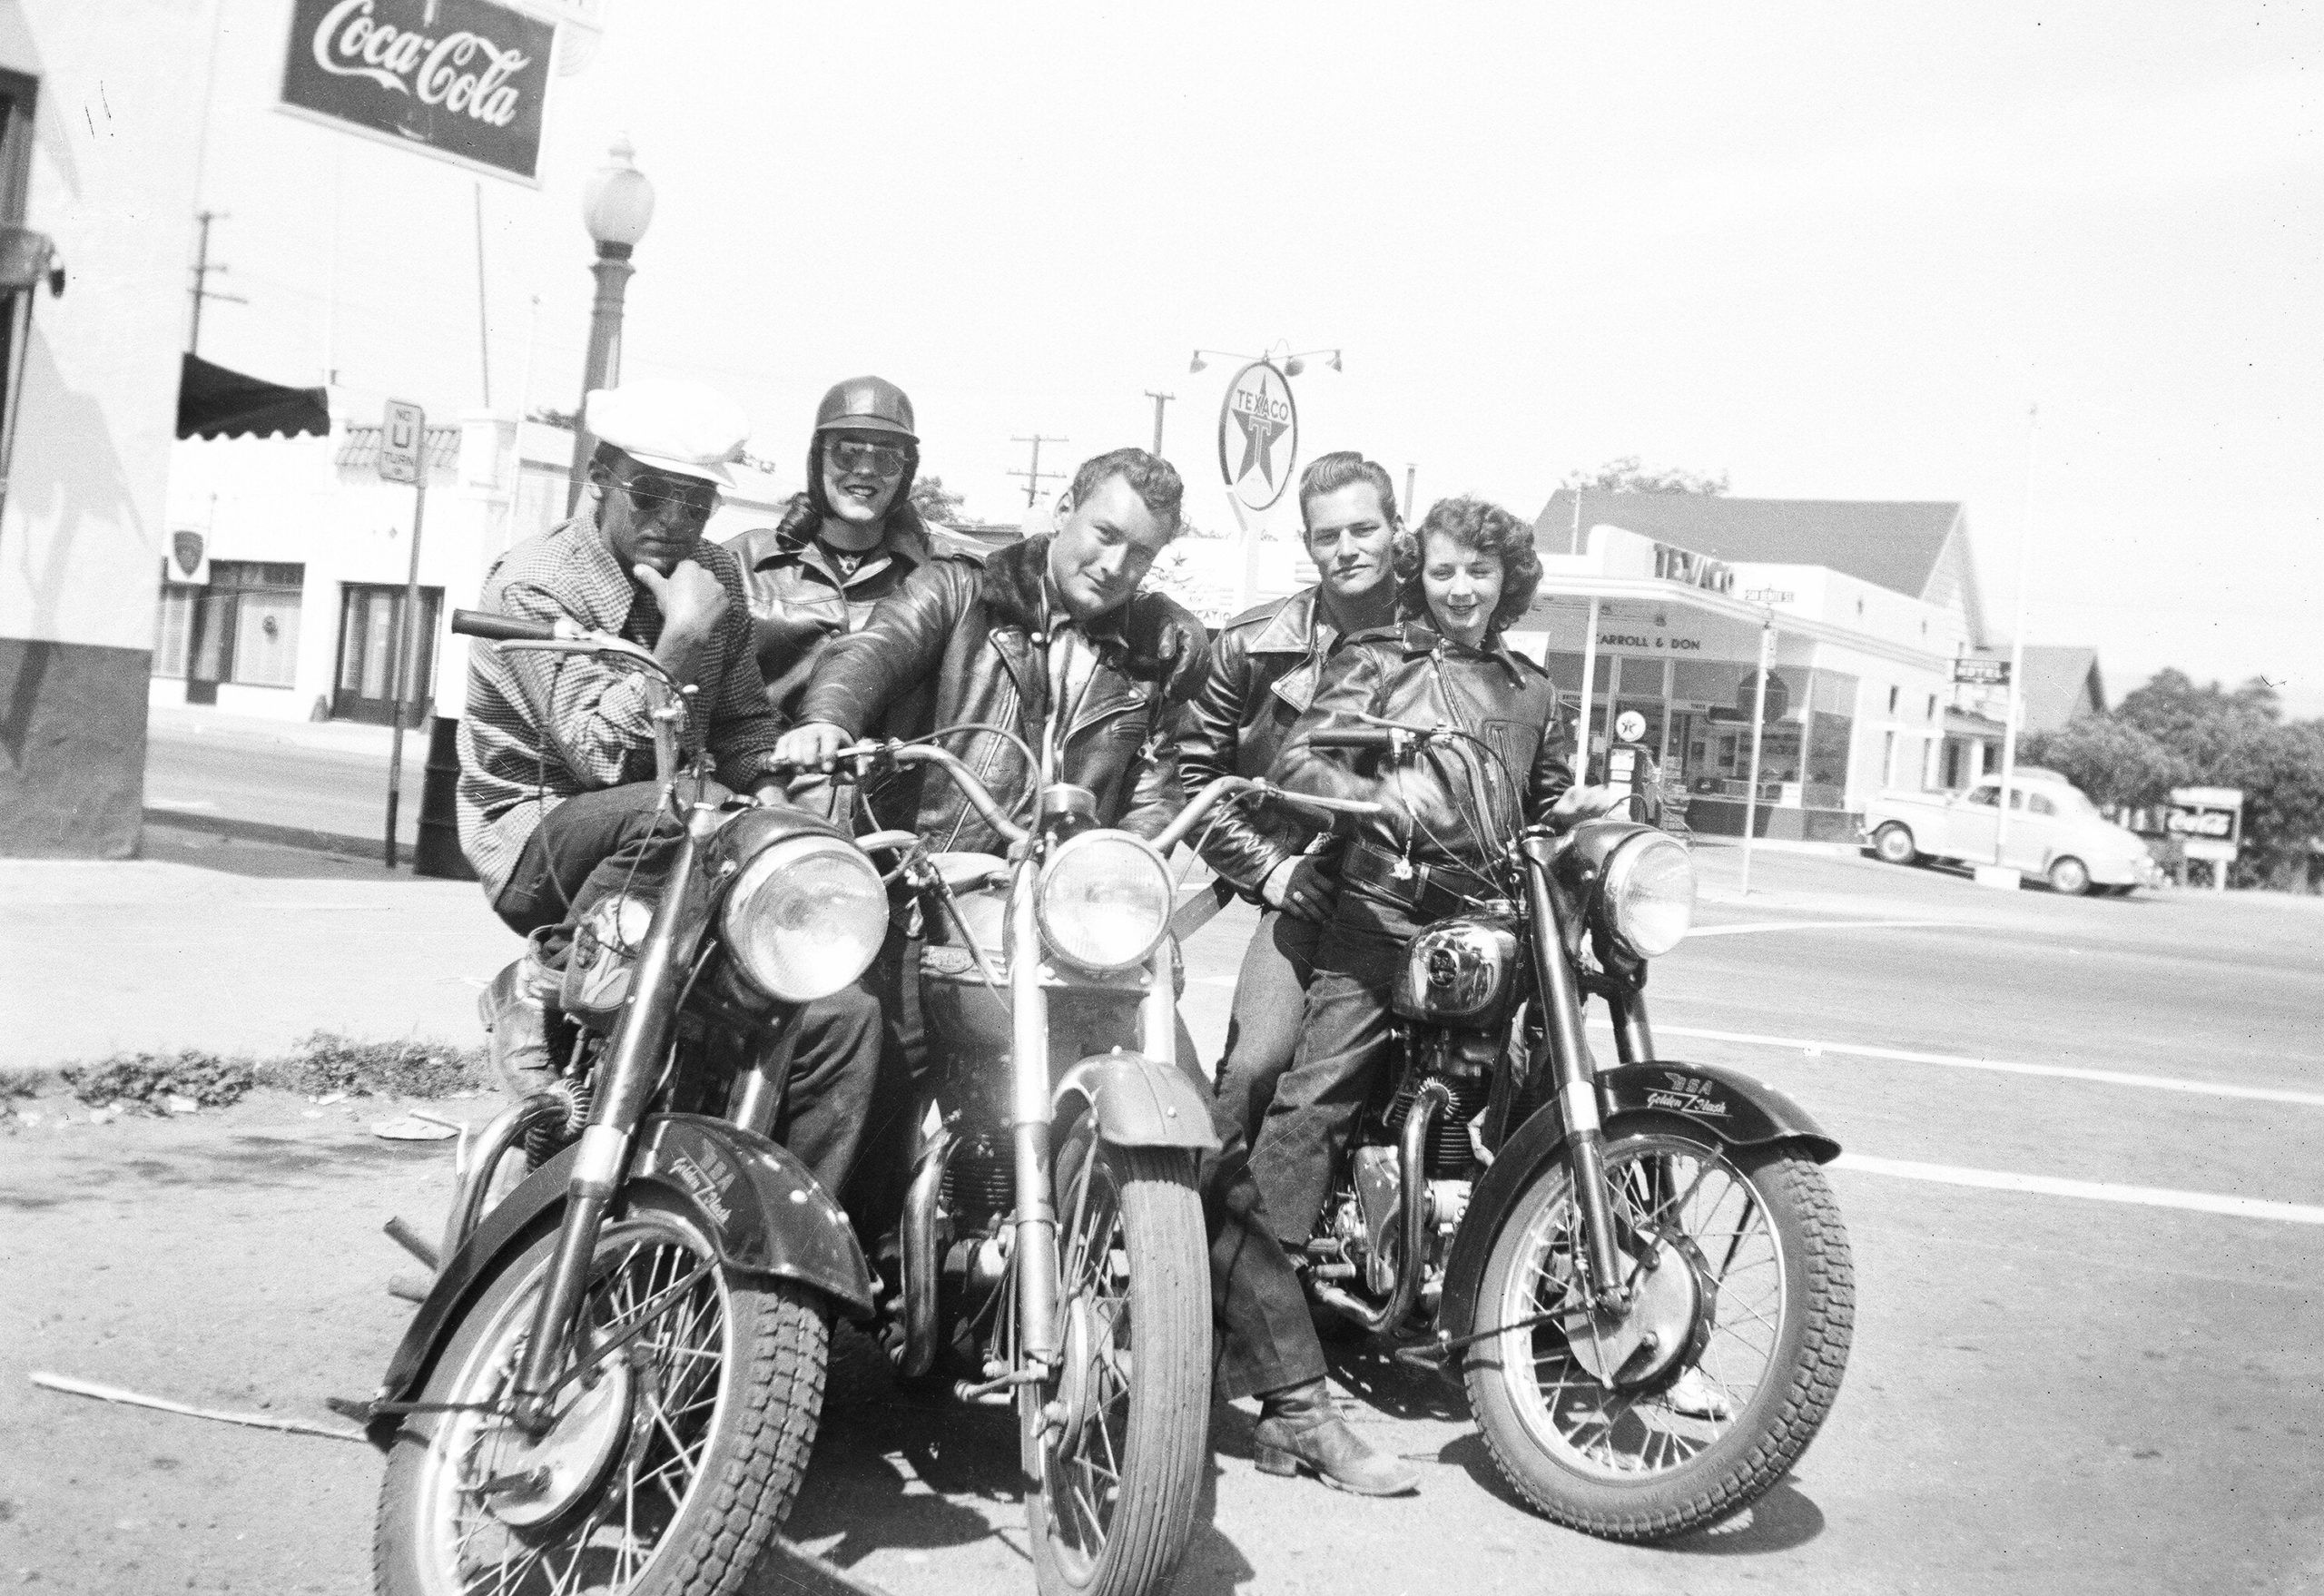 Male and Female riders pose for a photo on a street in Hollister, CA. in July 1947